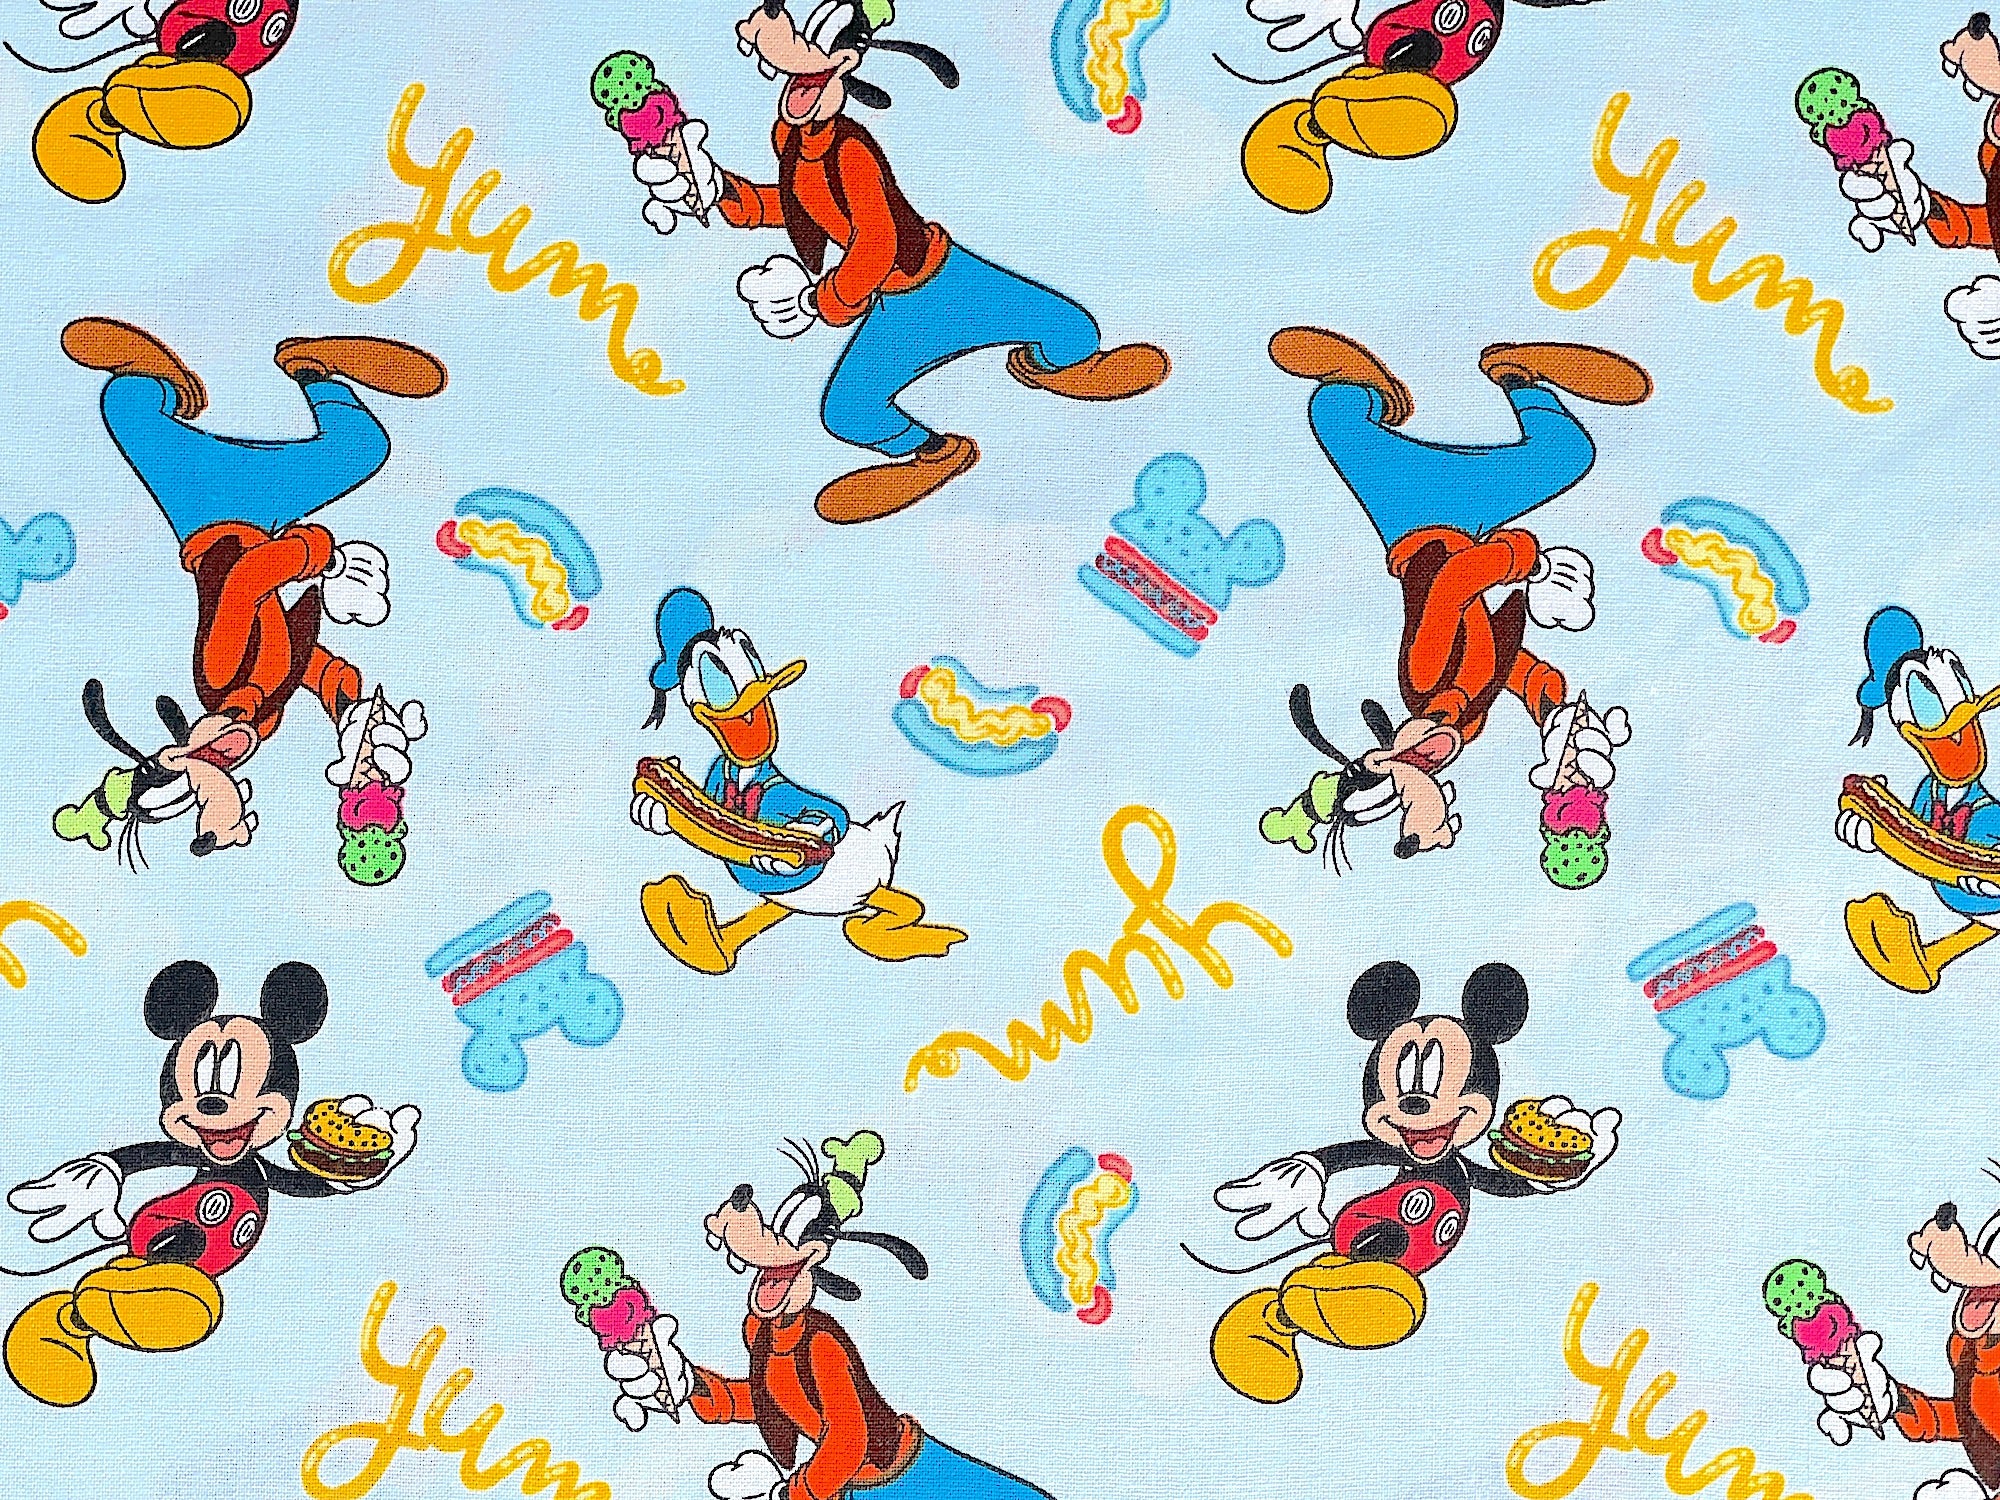 Light blue cotton fabric covered with Mickey Mouse, Donald Duck and Goofy.